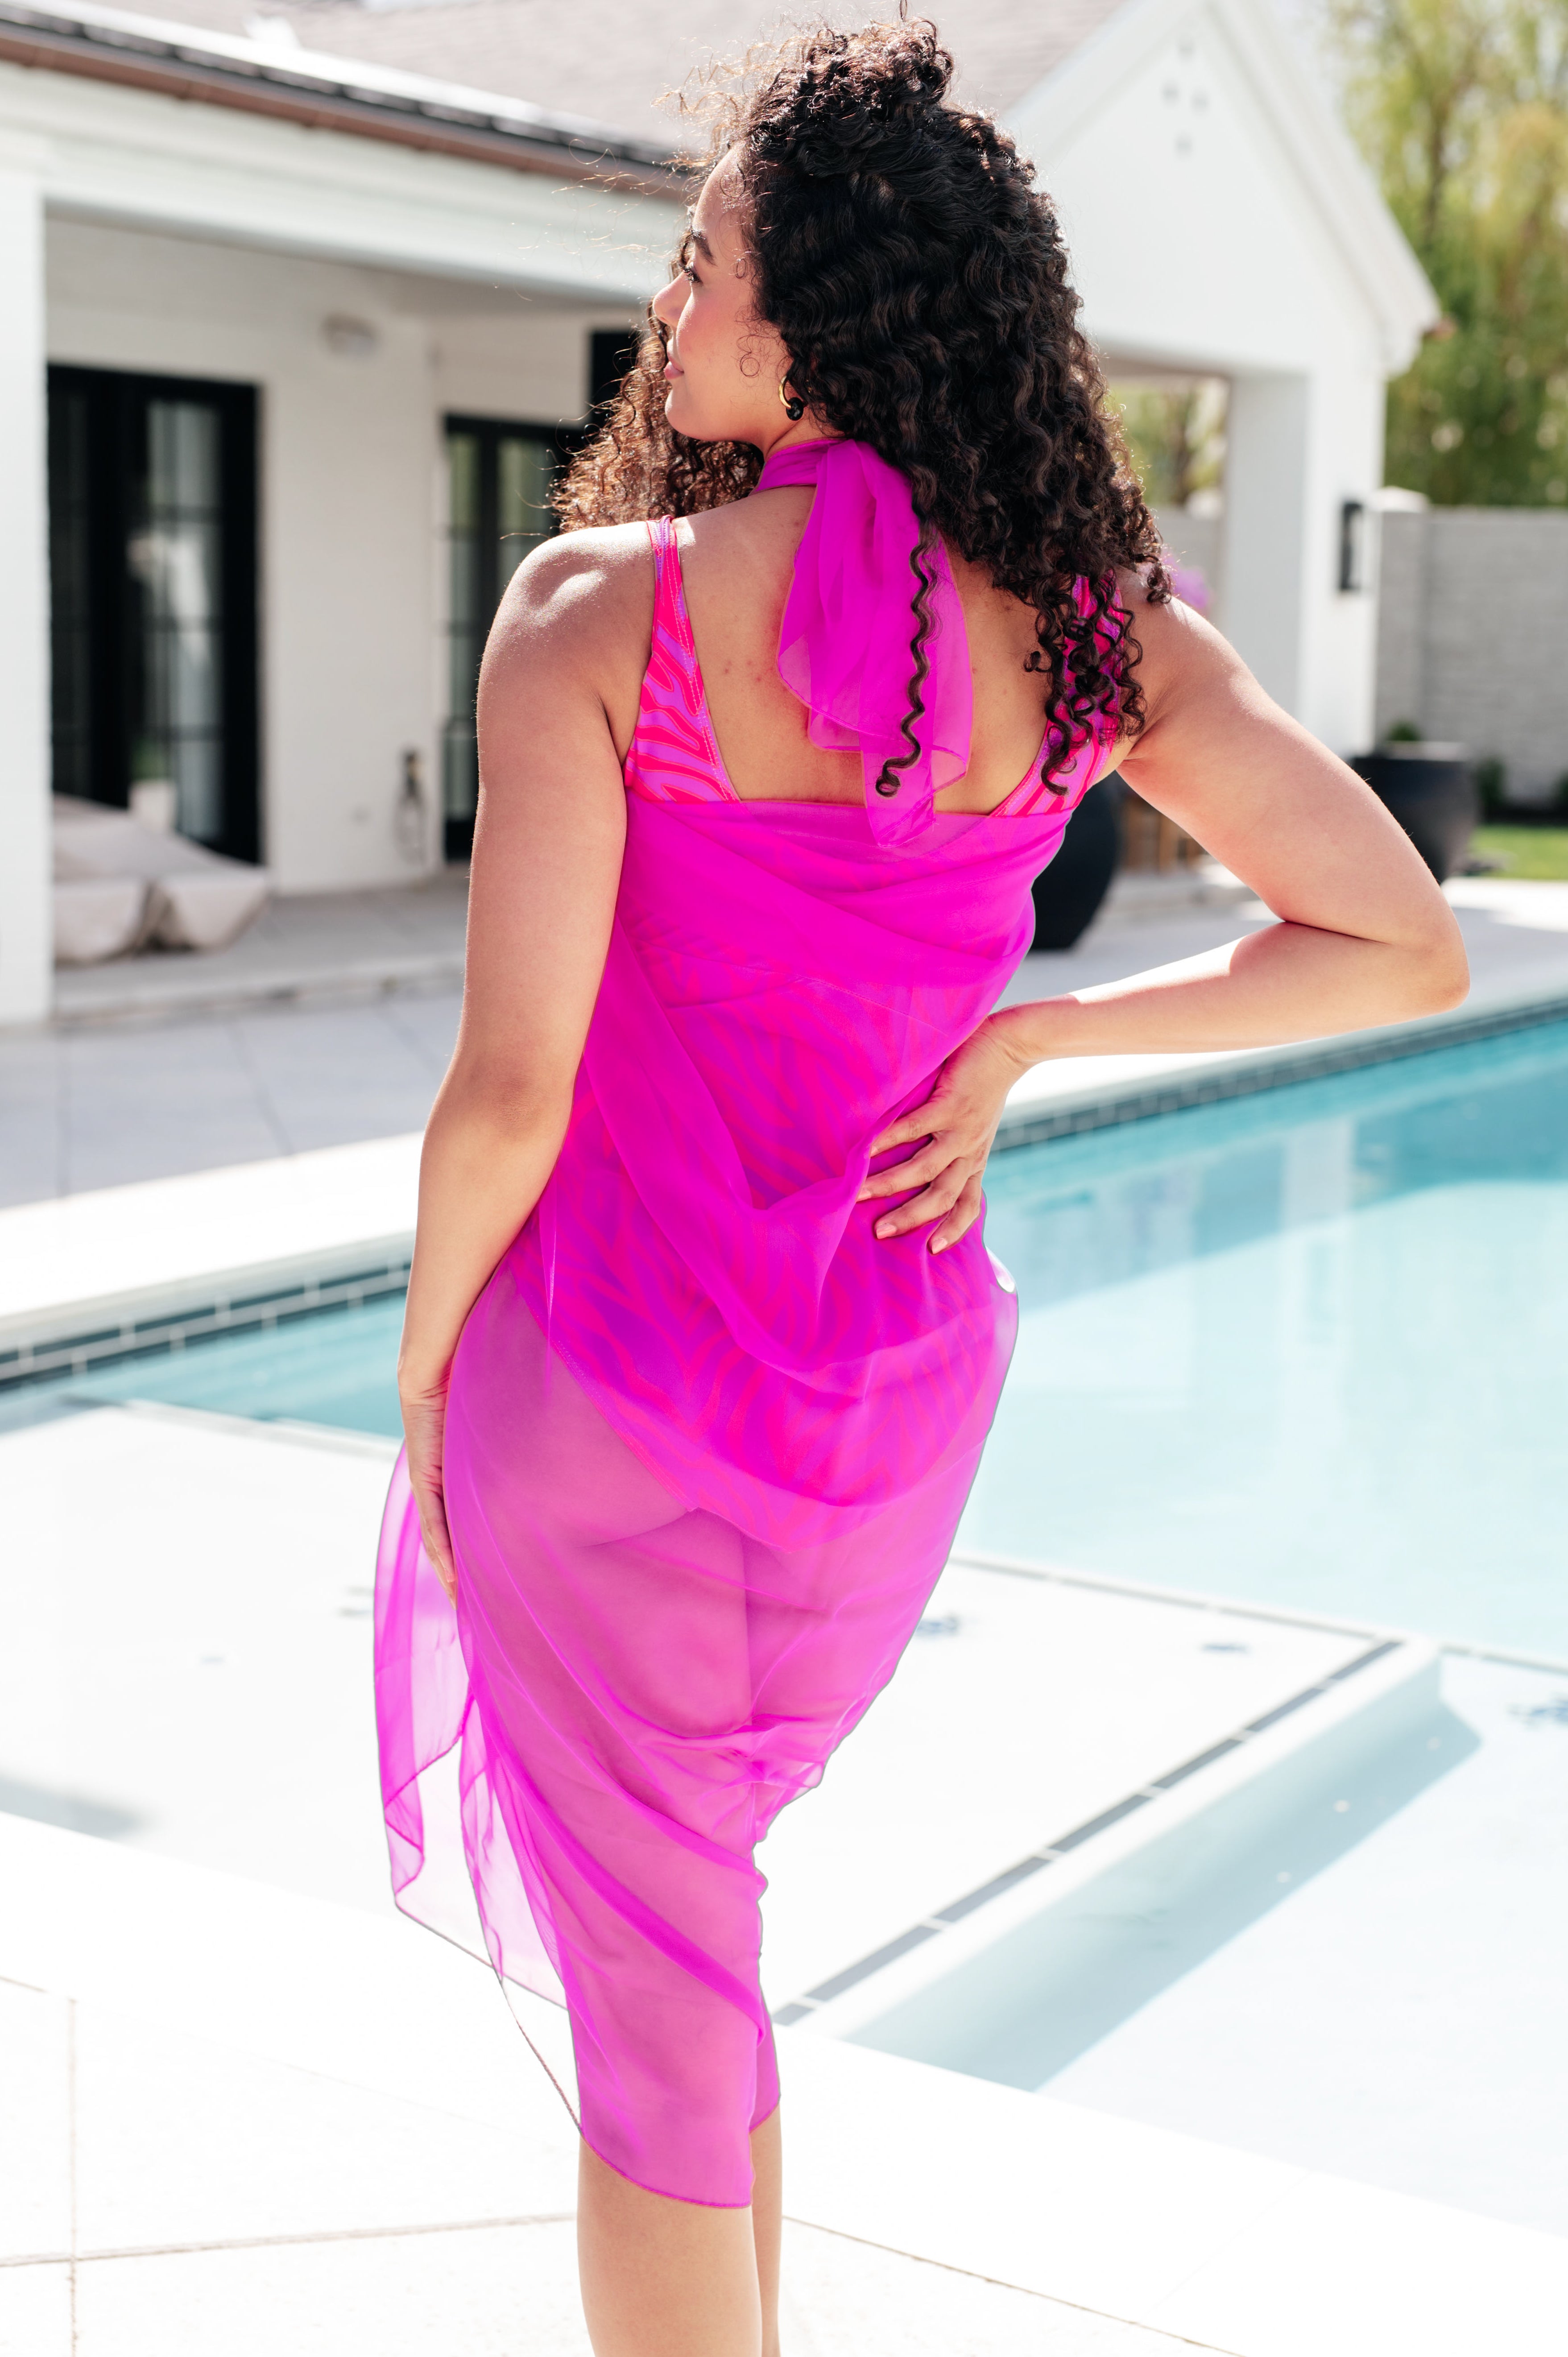 Wrapped In Summer Versatile Hot Pink Swim Cover-up